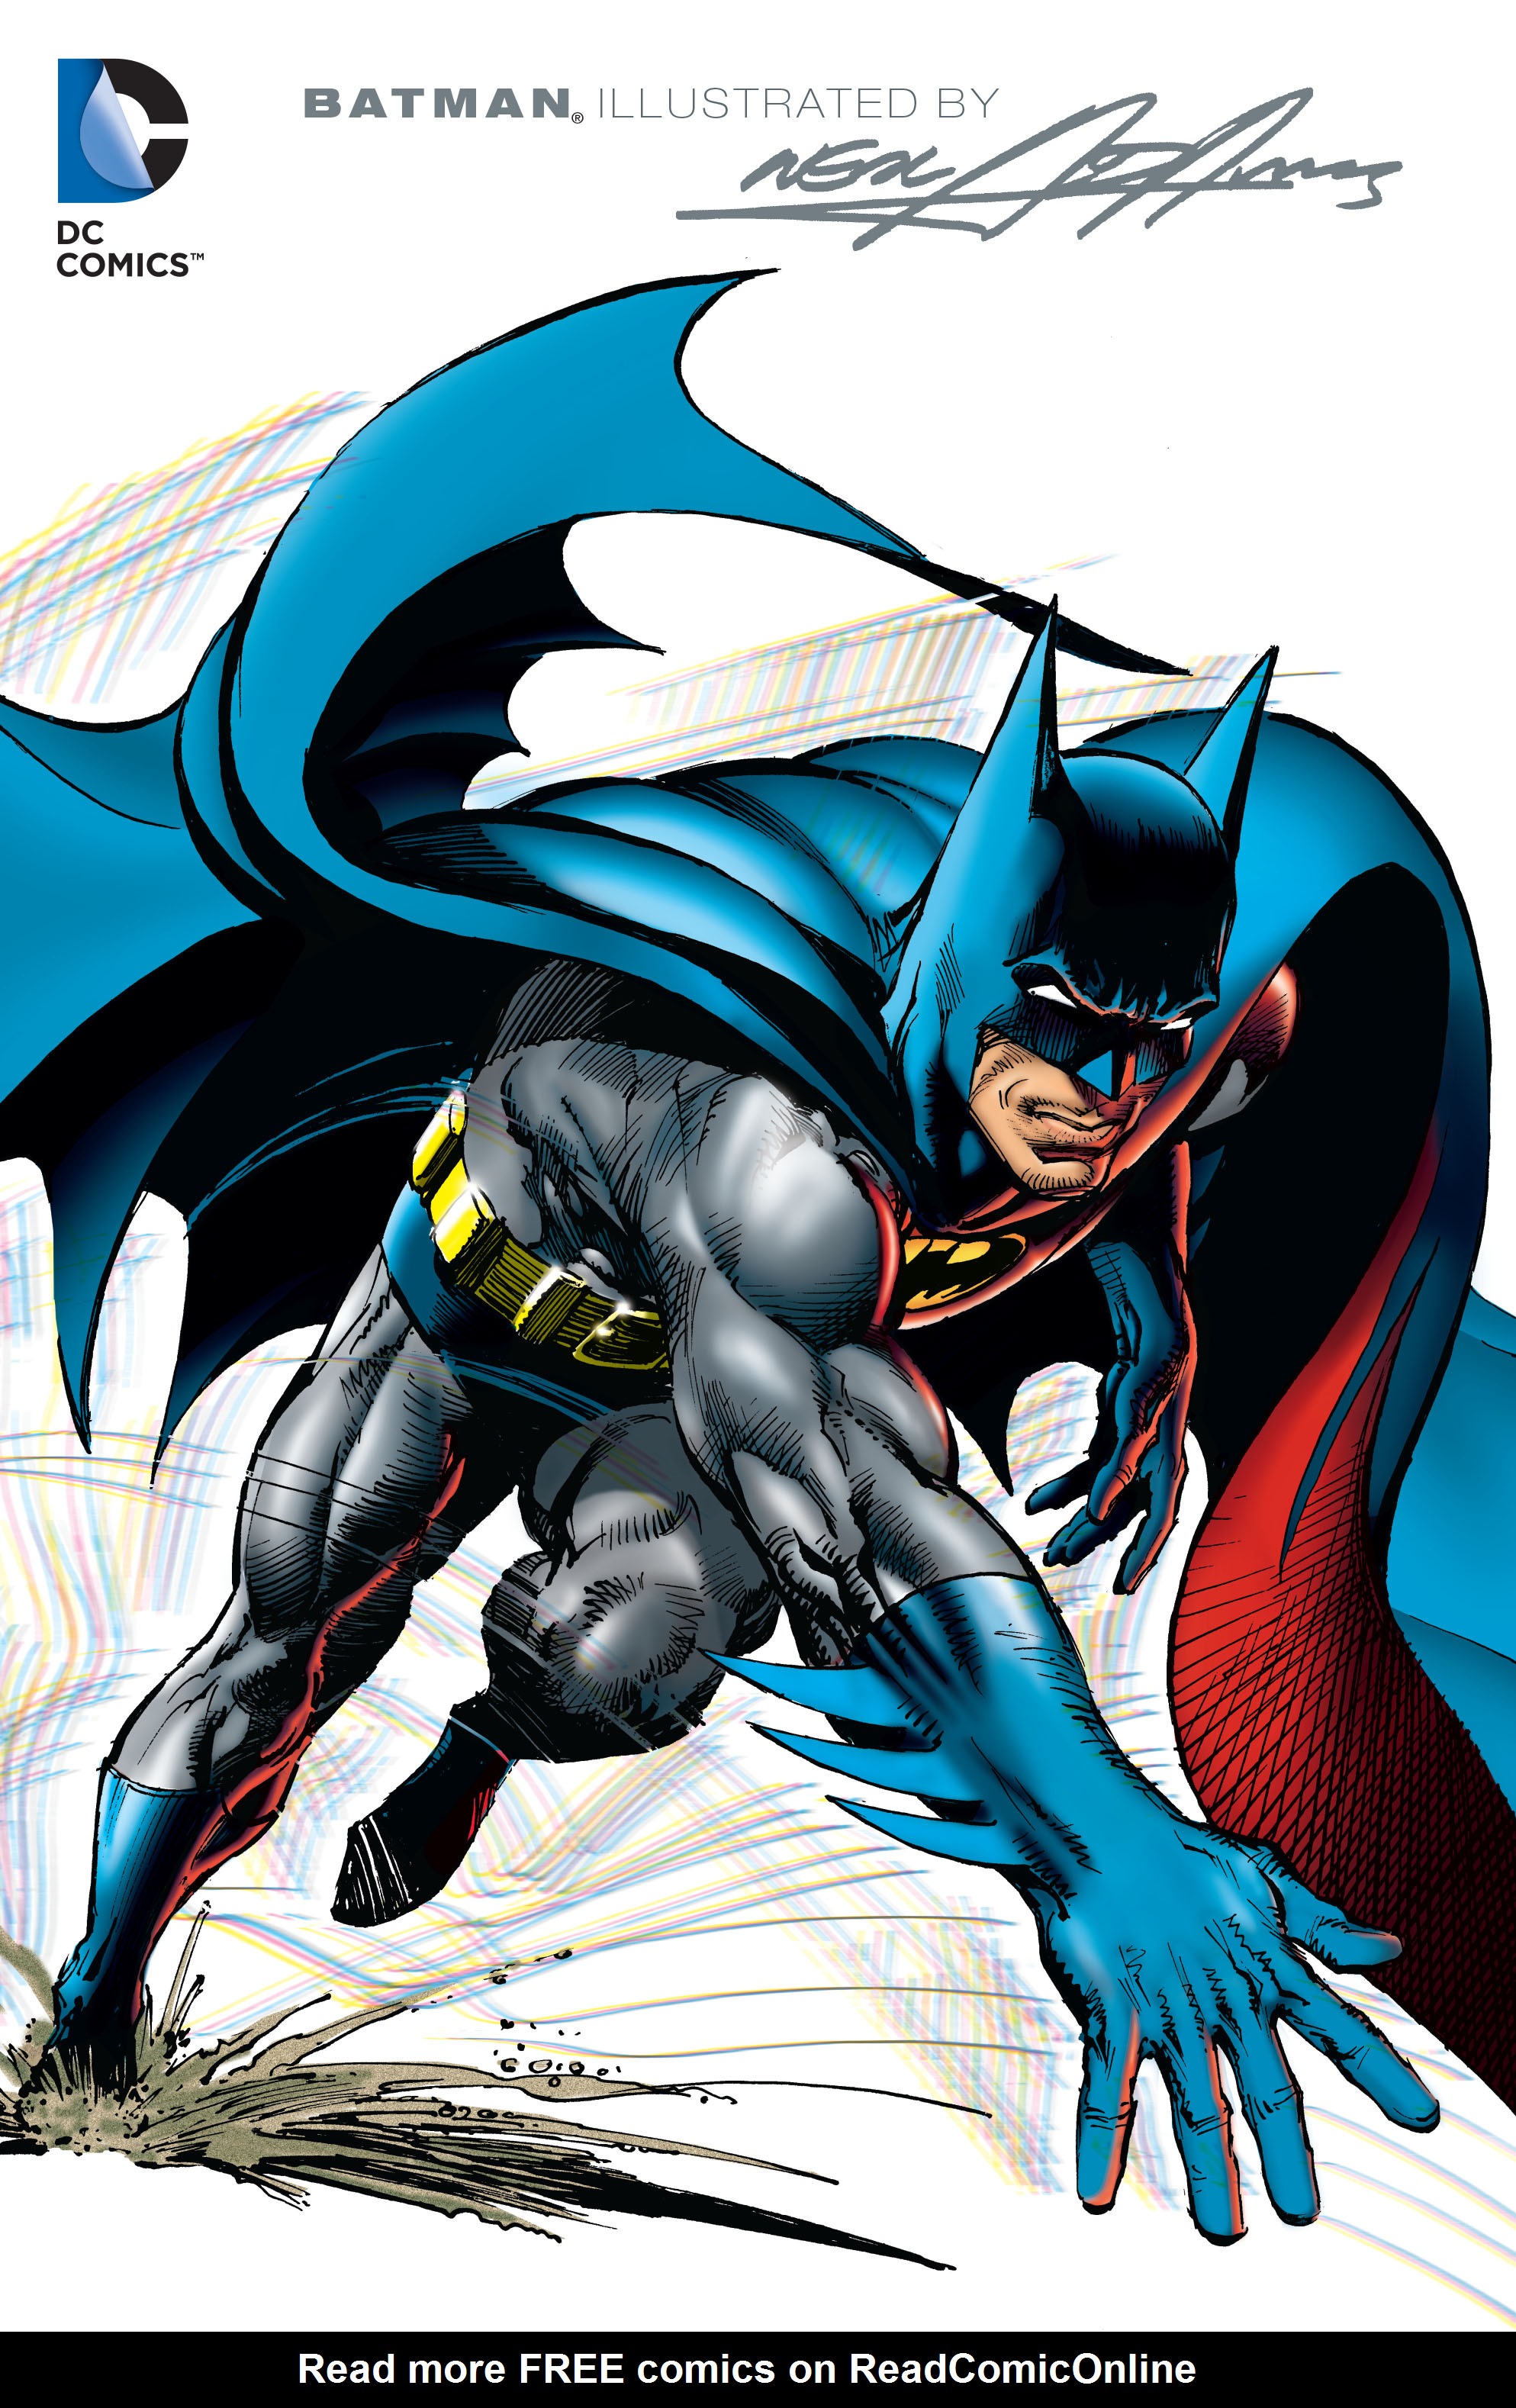 Read online Batman Illustrated by Neal Adams comic -  Issue # TPB 1 (Part 1) - 1